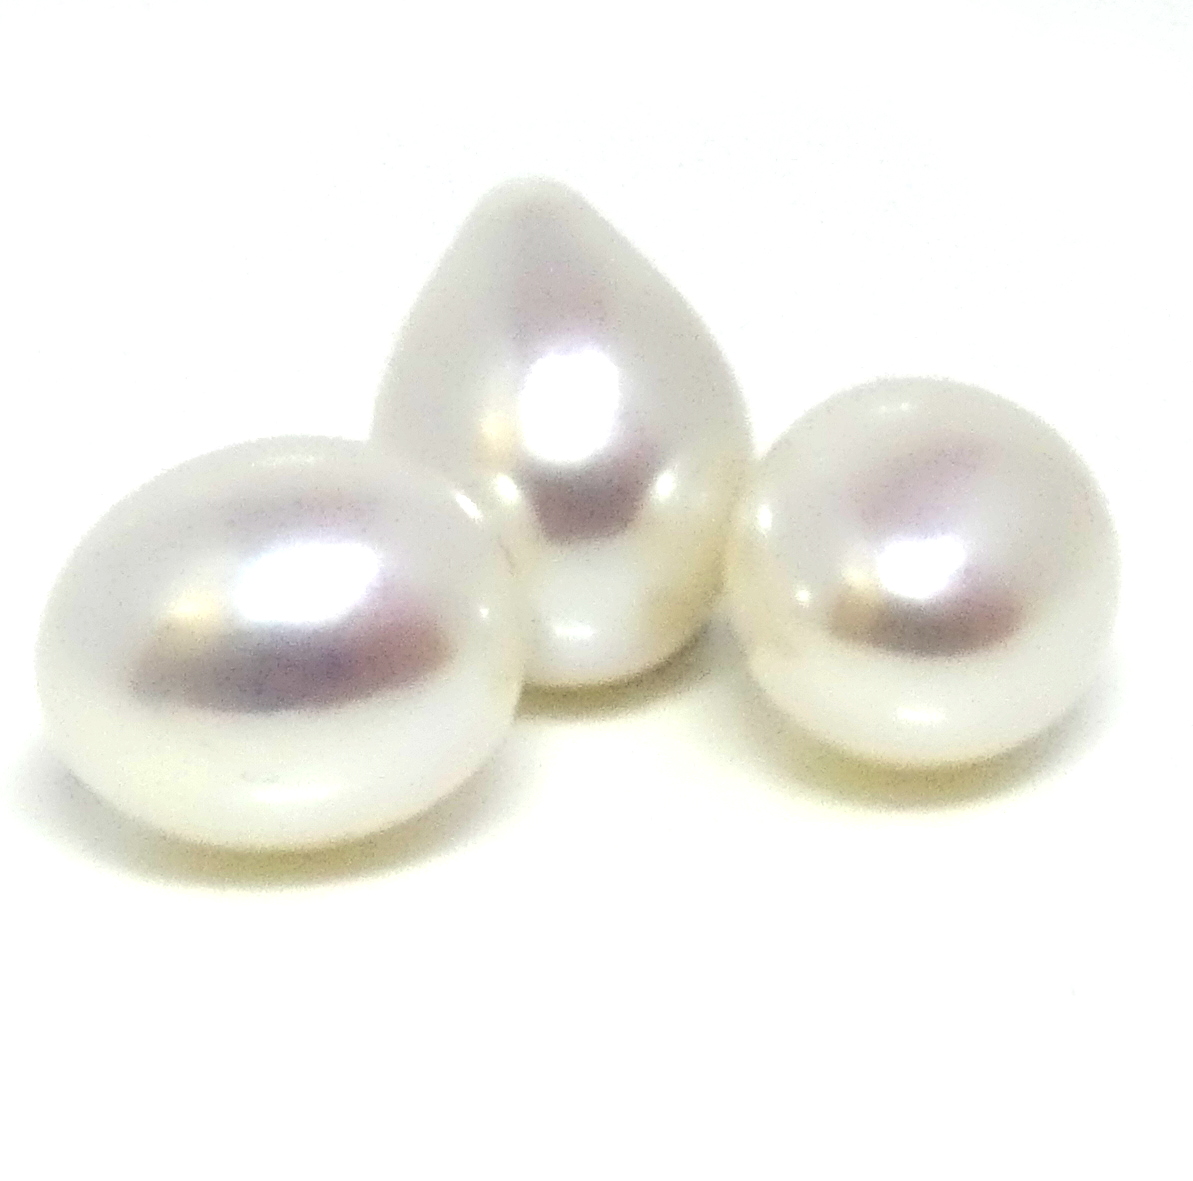 White 11.8mm Undrilled Drop Pair and Single Matching Pearl